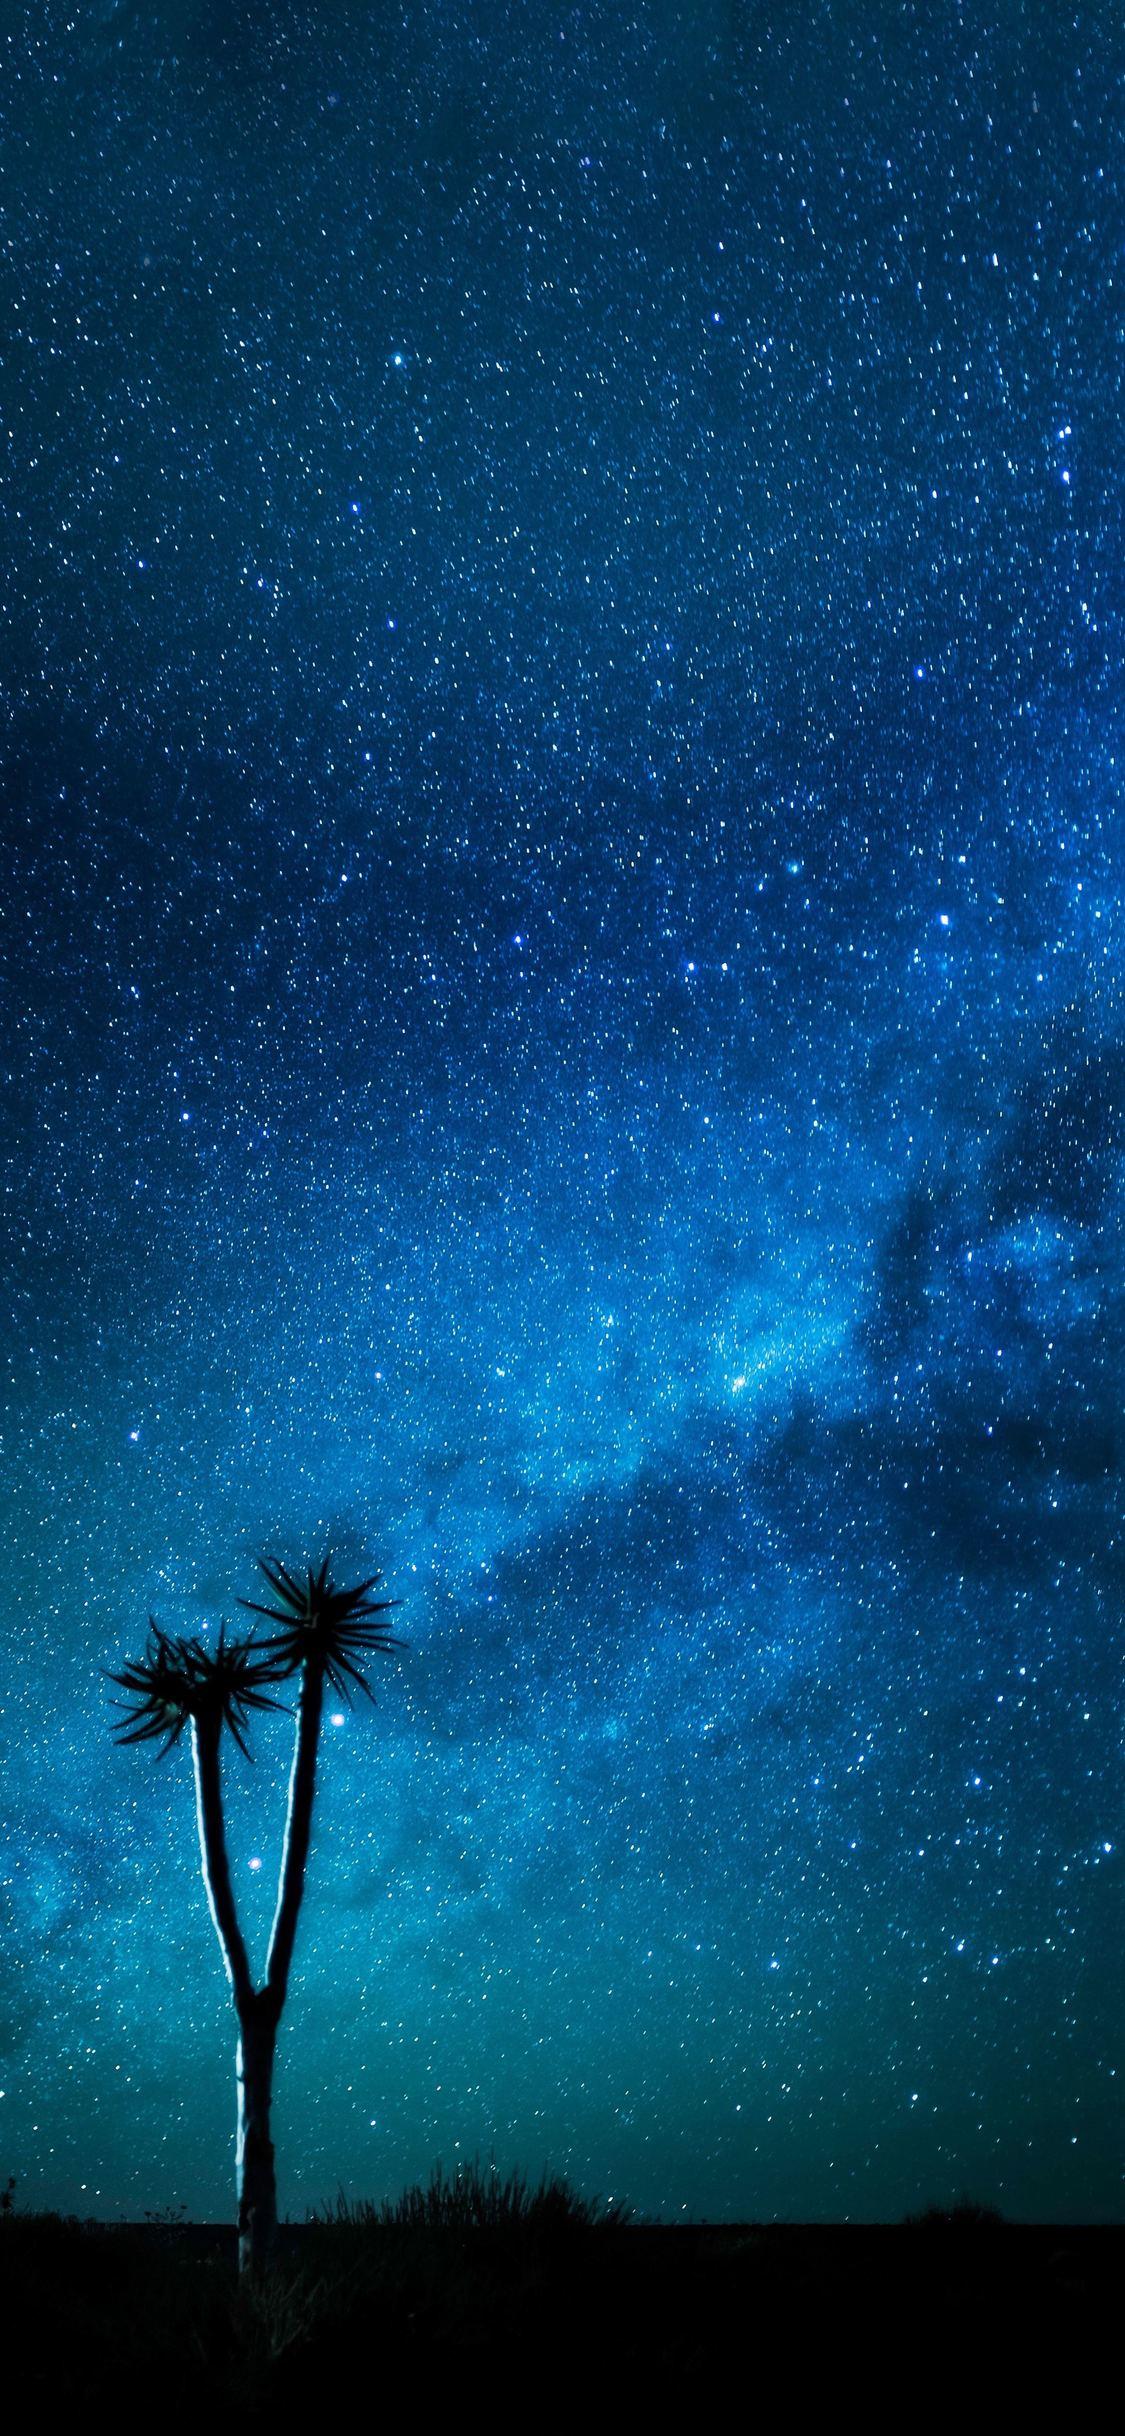 Galaxy Wallpaper for iPhone 6 81 images